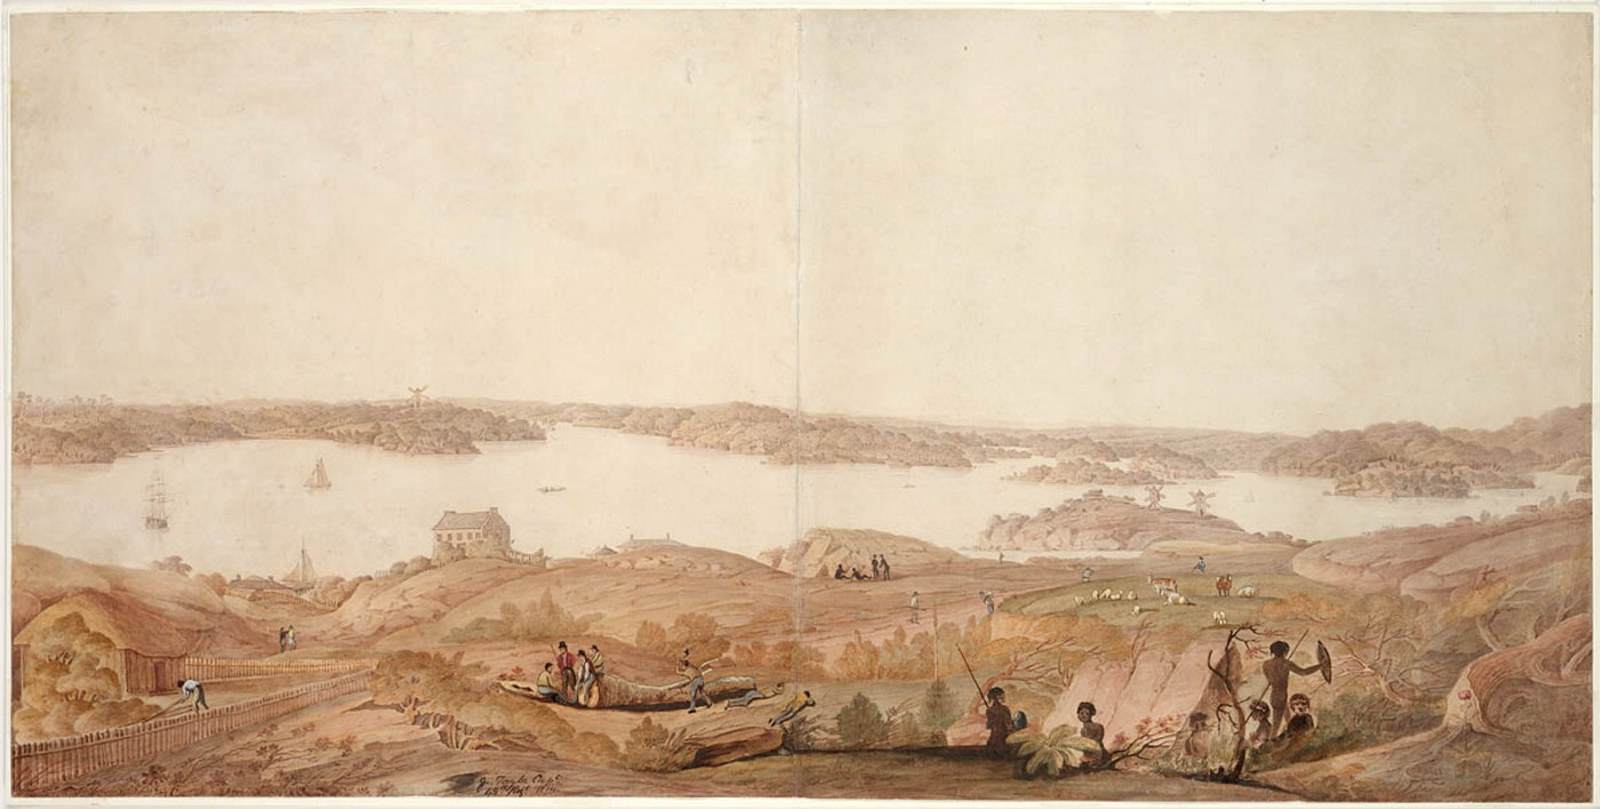 View of bay with Aboriginal people in foreground and a distant view of buildings along shore.